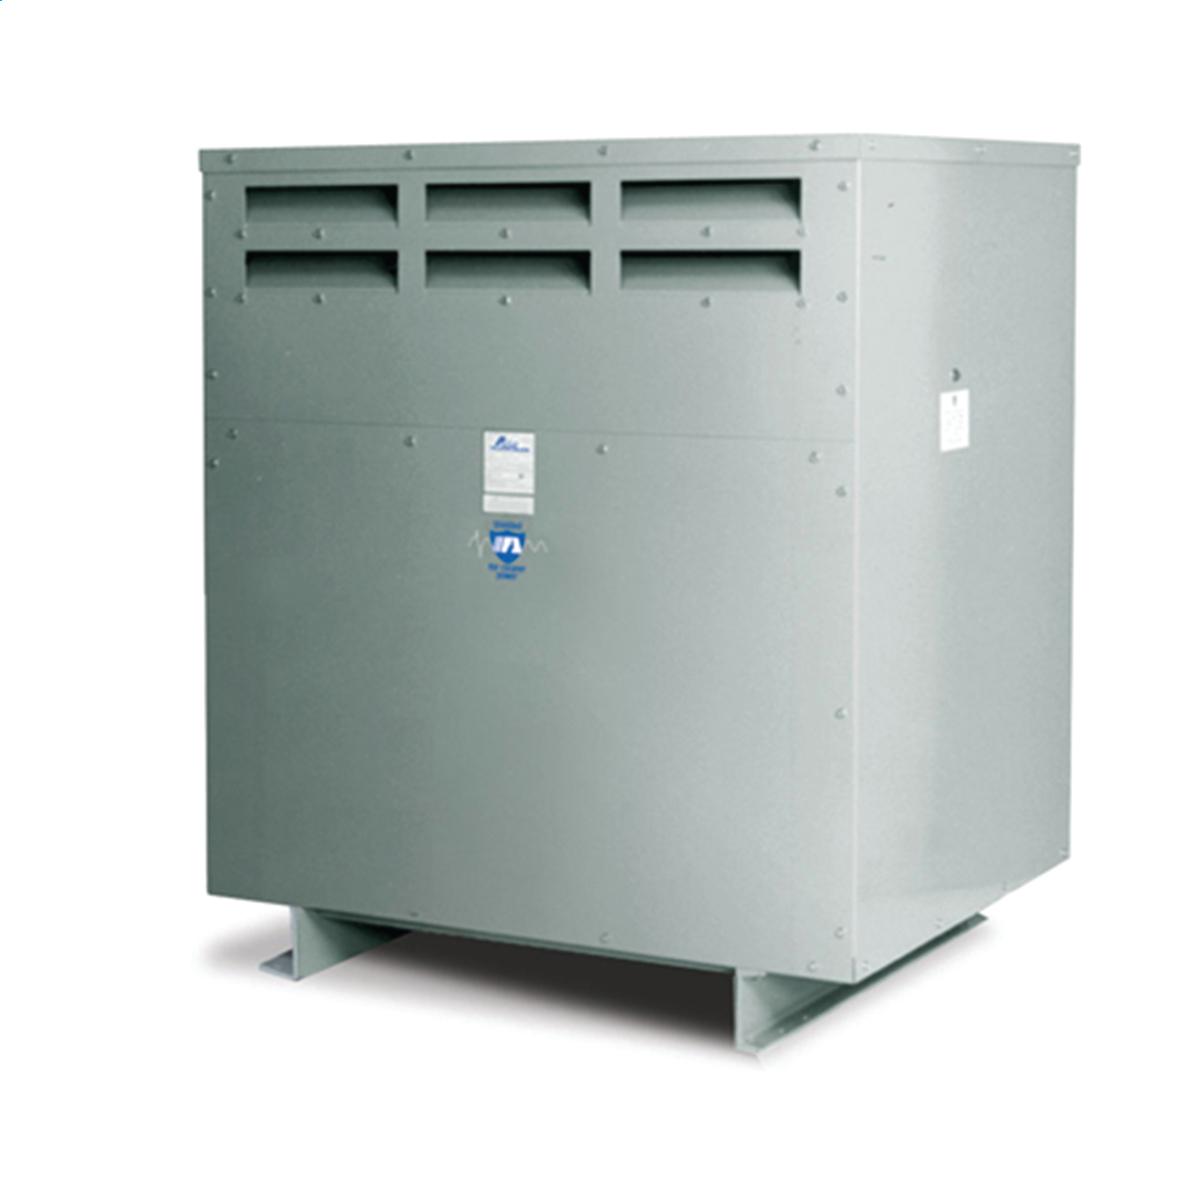 Hubbell WI015M25 Medium Voltage Transformer - Three Phase, 4800Δ - 480Y//277V, 1500kVA  ; Lower operating cost over Liquid-filled ; No additional fireproofing or venting ; Long life expectancy ; Smaller, lighter easy to maintain